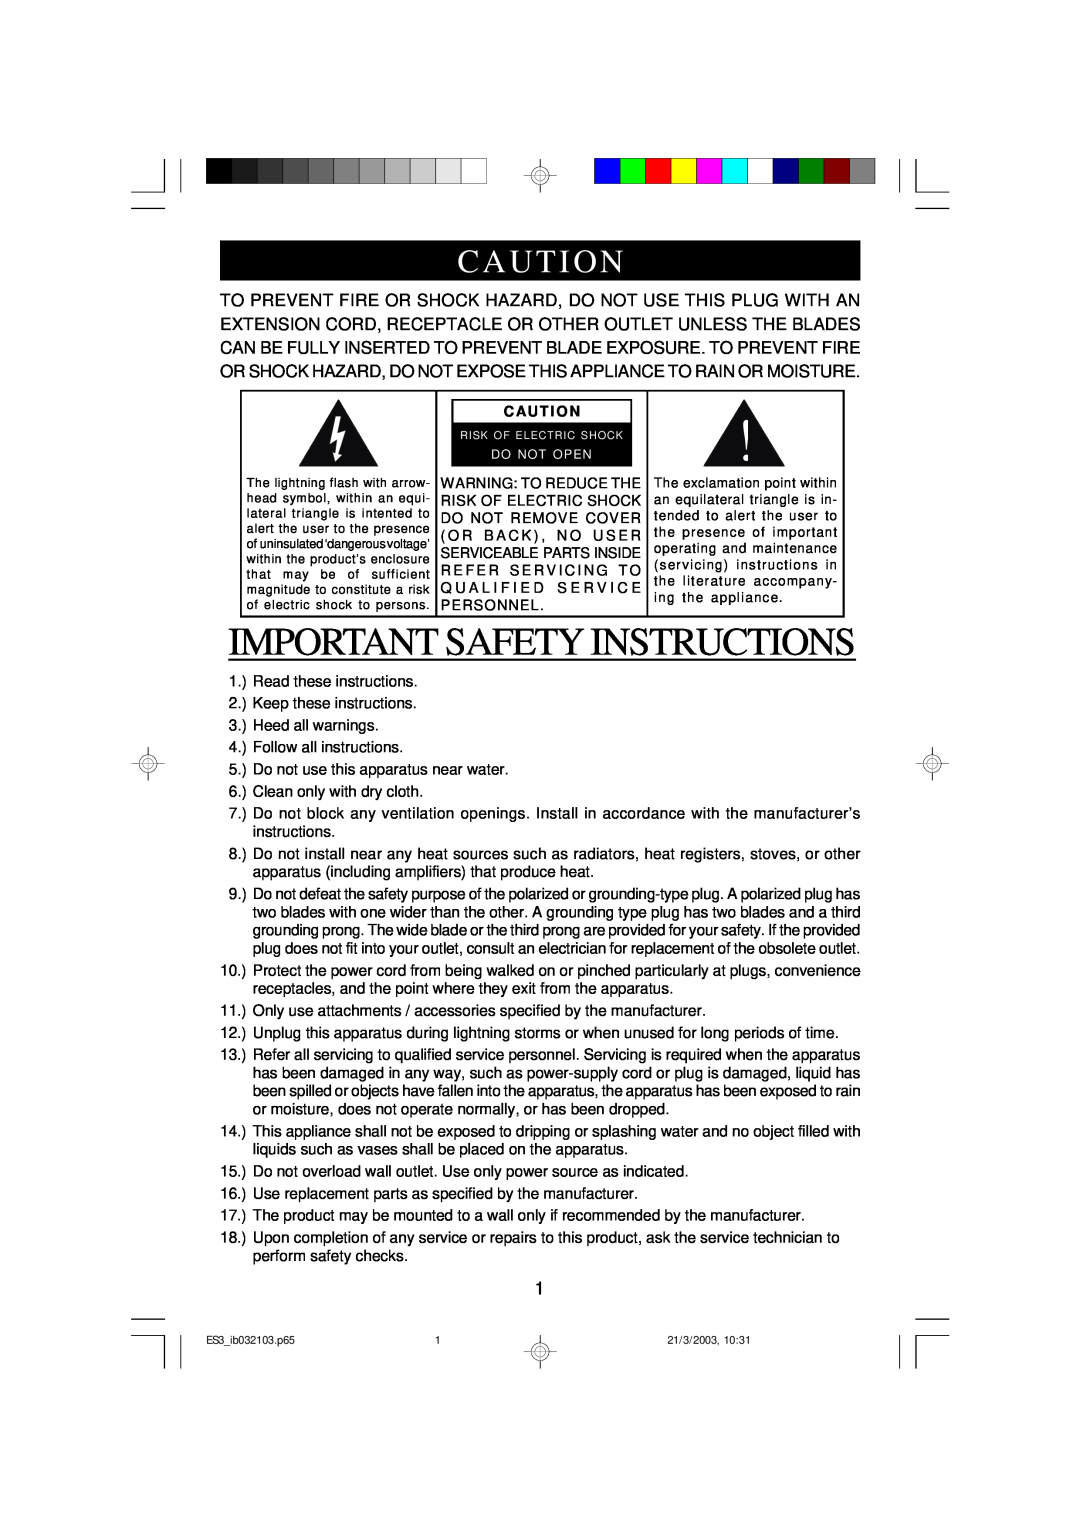 Emerson ES3 owner manual Important Safety Instructions, Caut I On, Caut I O N 